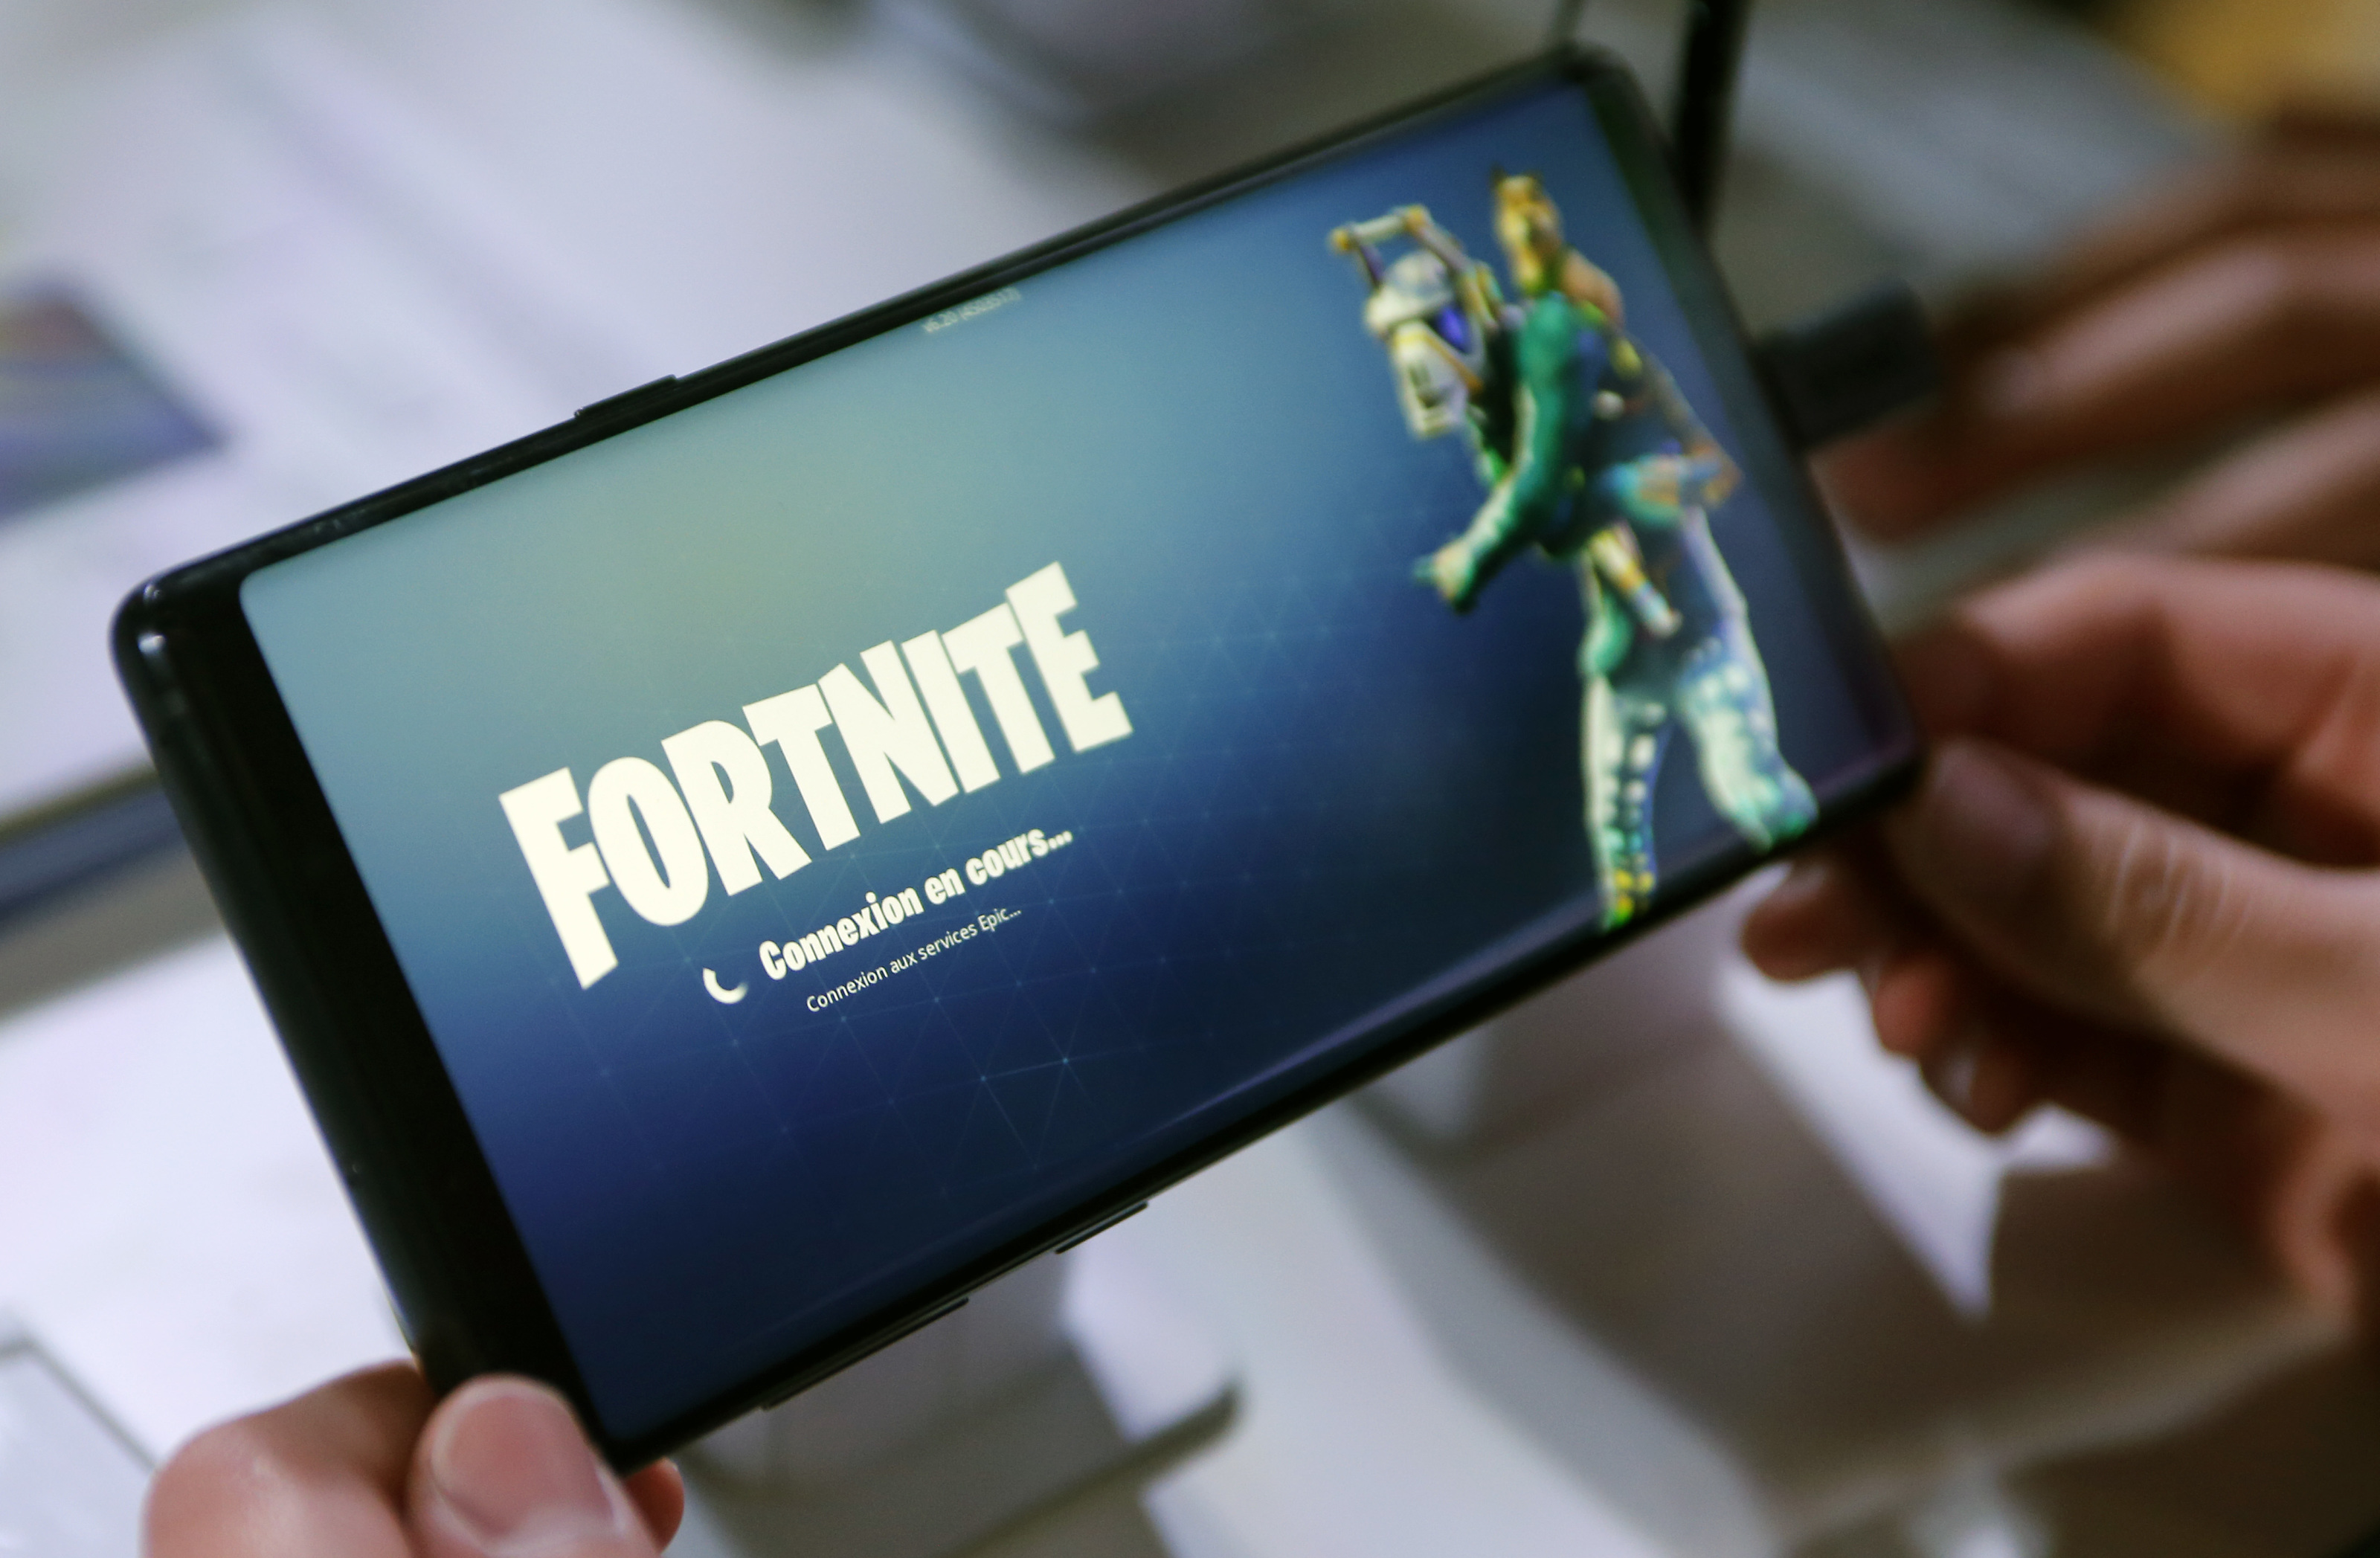 You Can Still Download and Play 'Fortnite' on Android